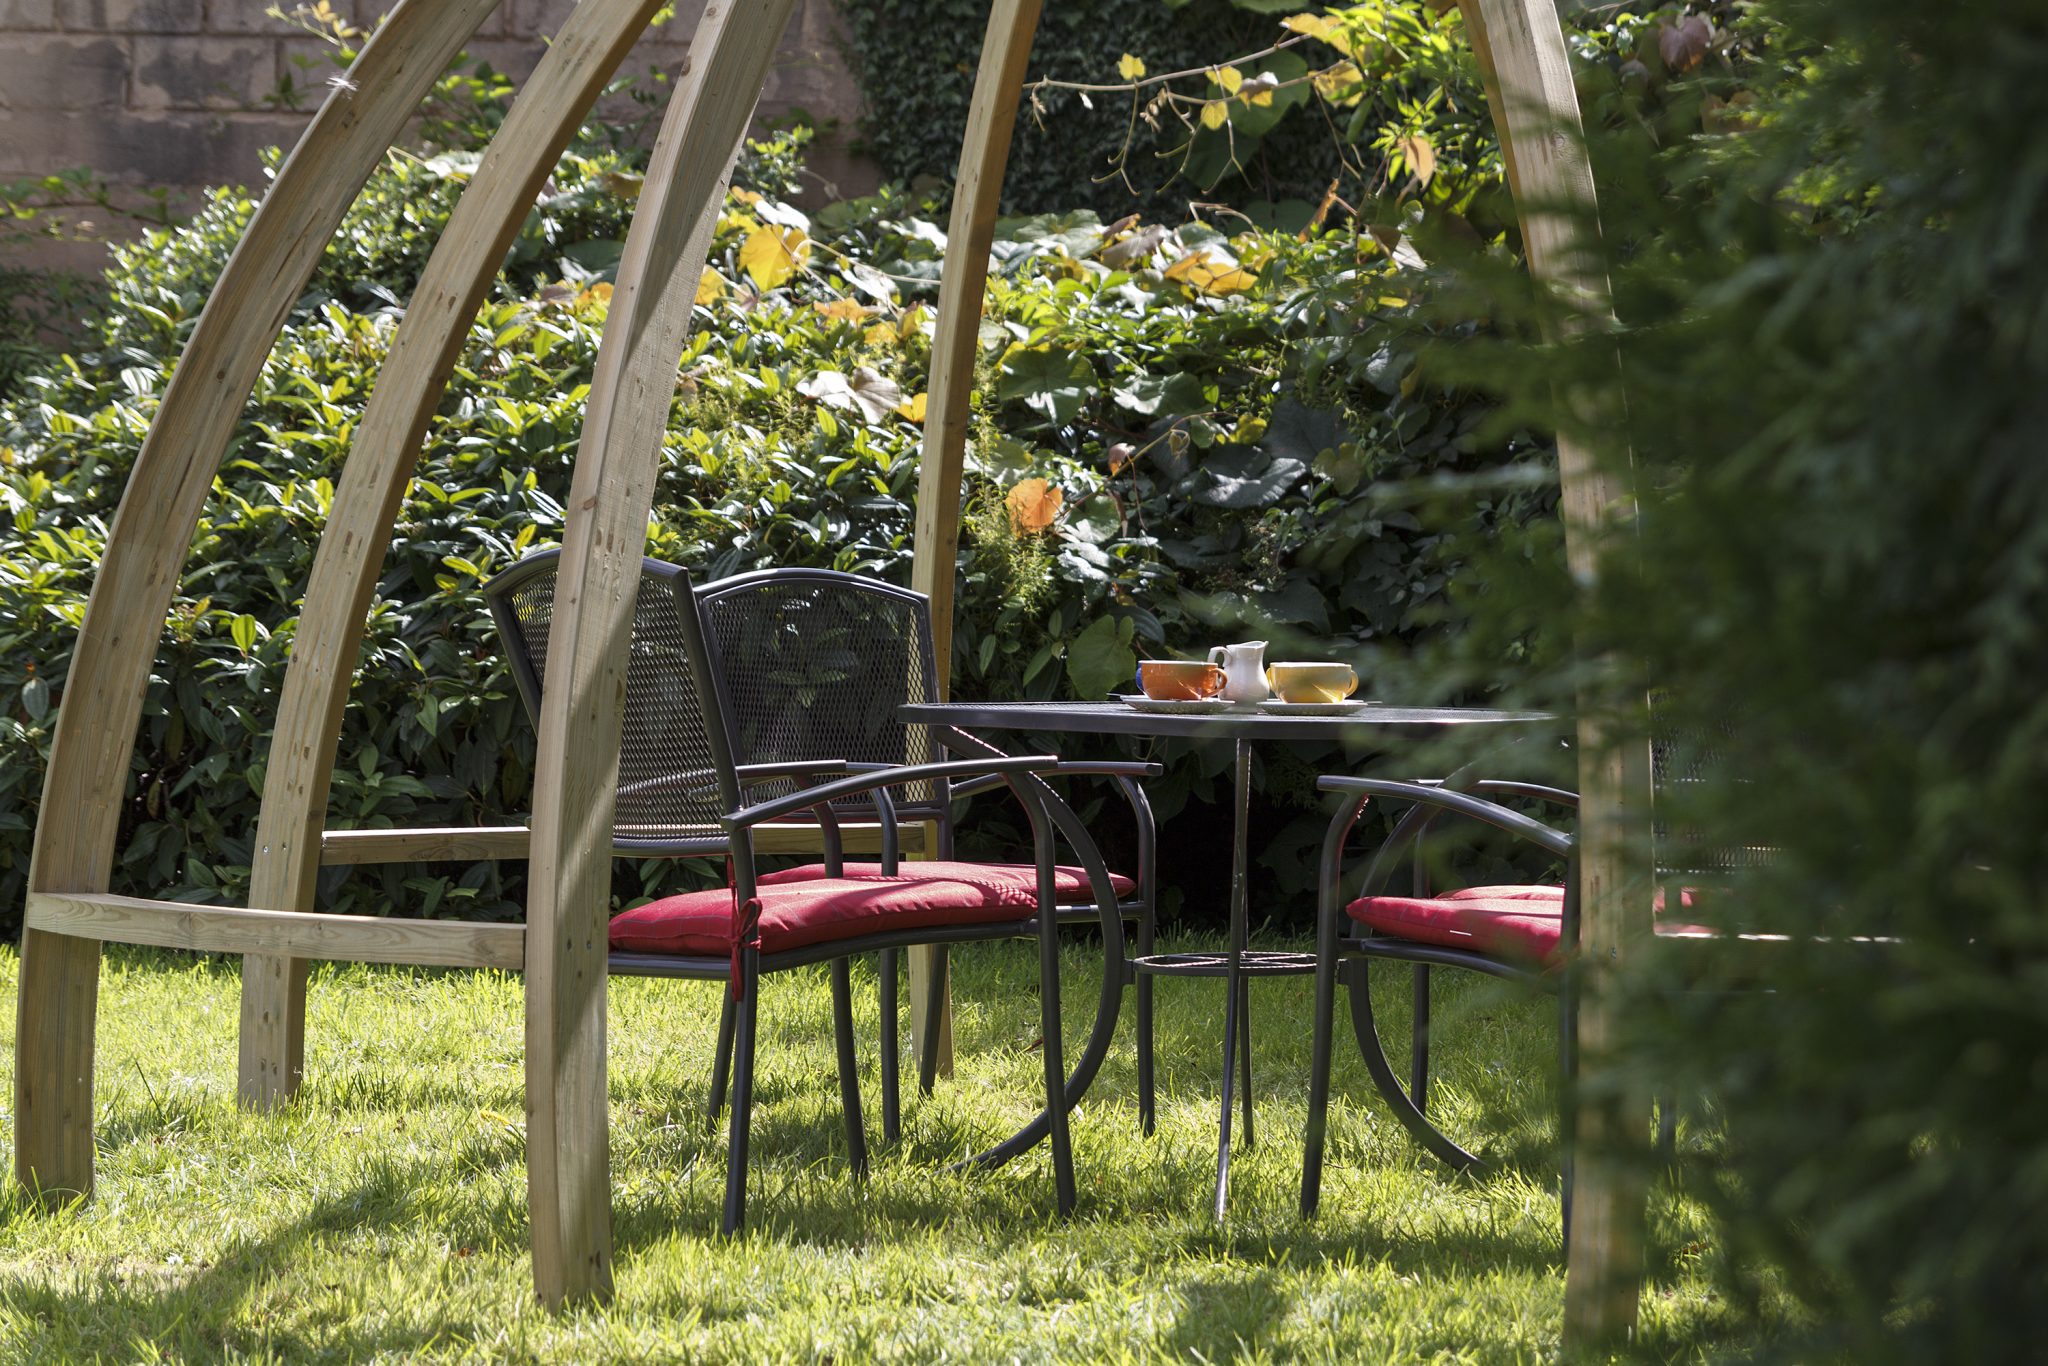 The Apollo Pergola is a distinctively designed dome shaped structure that will give your garden a contemporary feel. The beams and rafters are made from pressure-treated timber providing extra protection from outdoor elements.